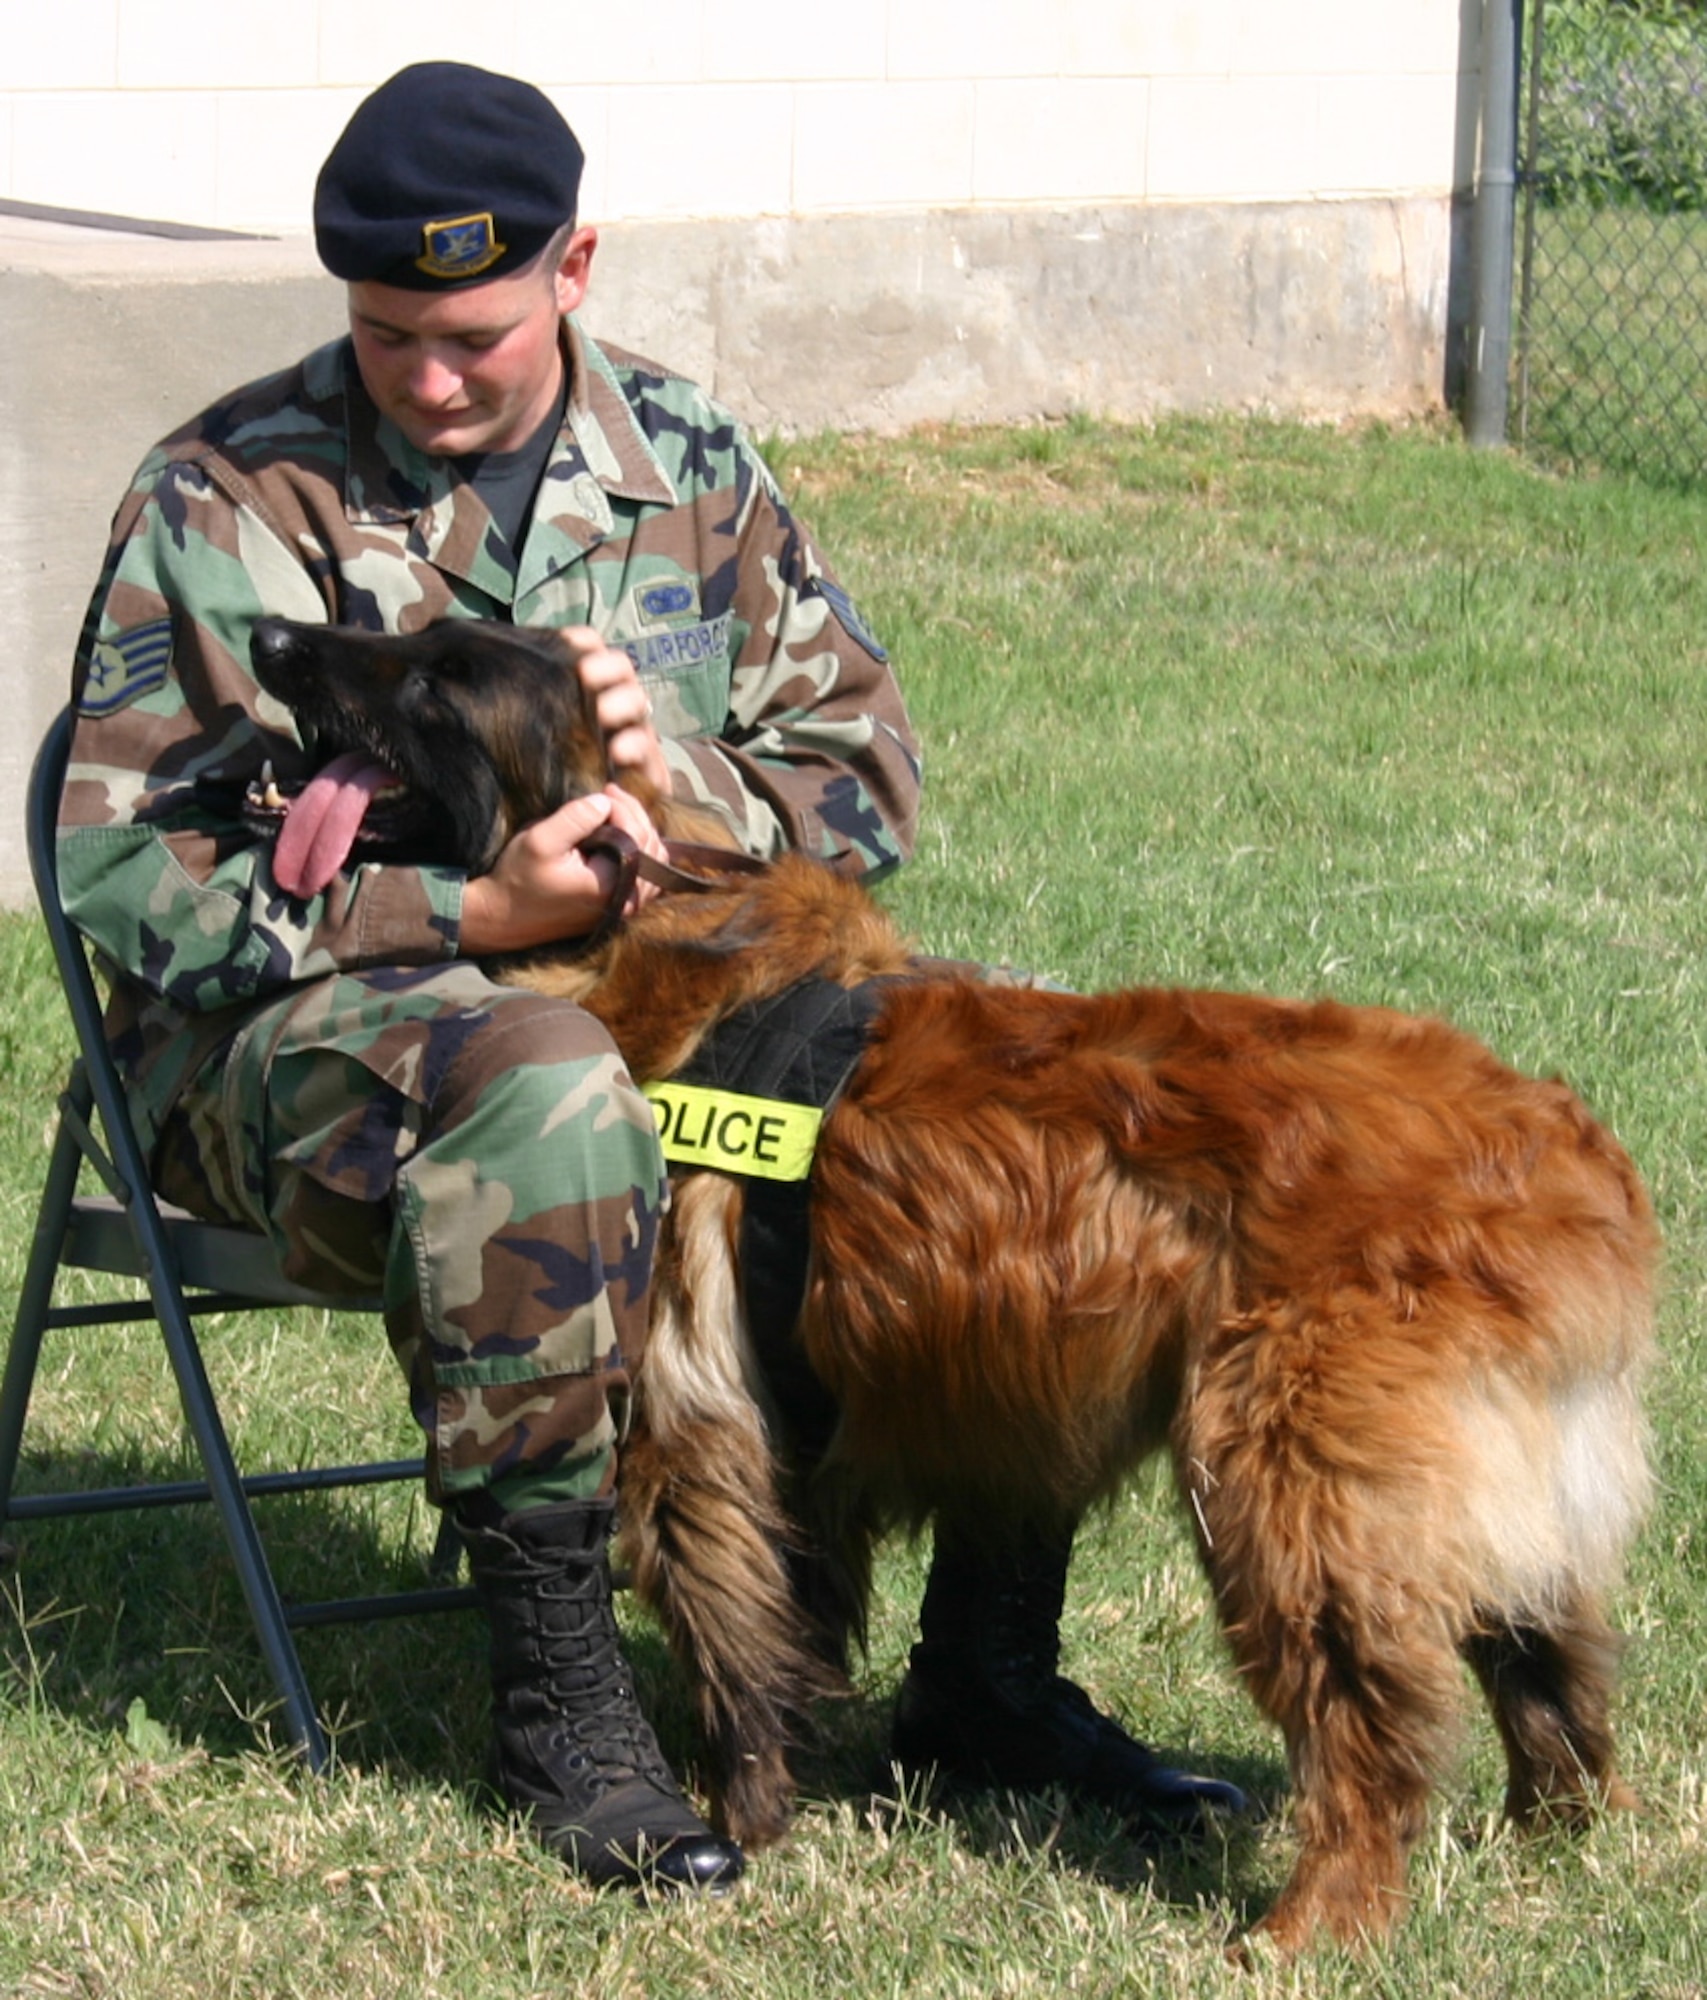 Staff Sgt. Thomas Butler, 82nd Security Forces Squadron, shows Charque, his military working dog, some affection during the dog’s retirement ceremony May 25. (U.S. Air Force photo/Staff Sgt. Jennifer Baxter).